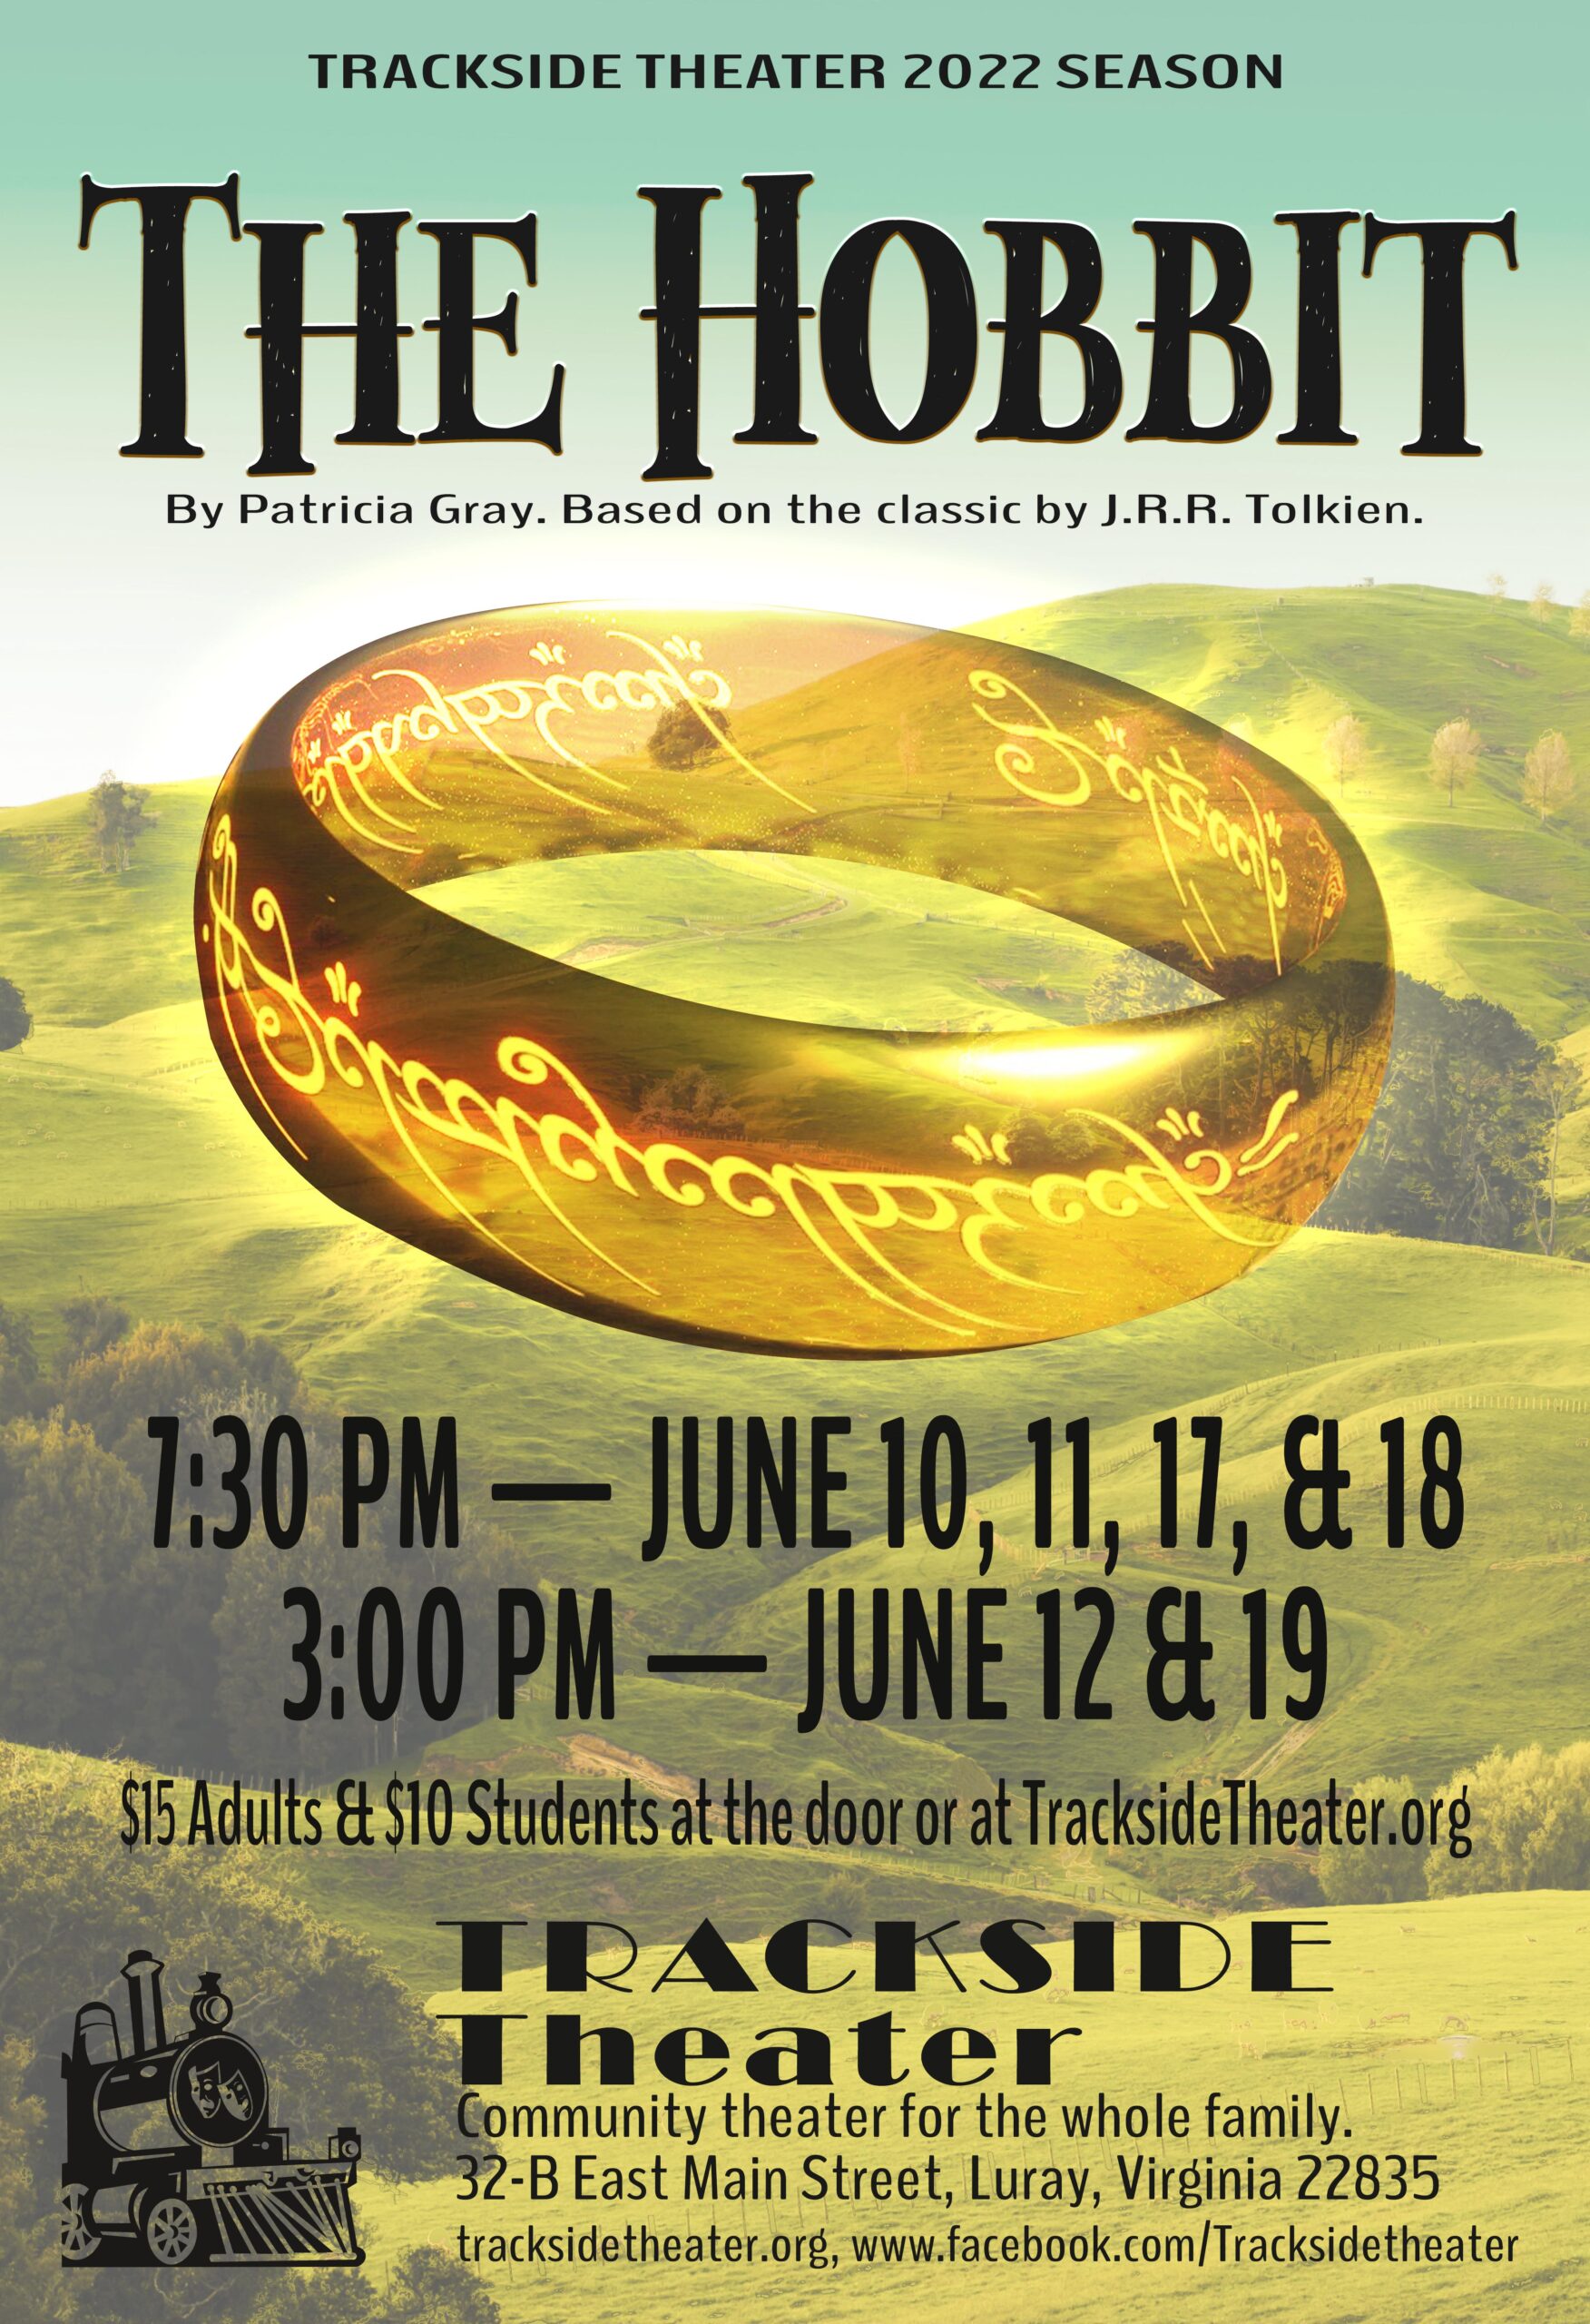 Poster for The Hobbit Performance at Trackside Theater June 10-19 at Trackside Theater in Luray